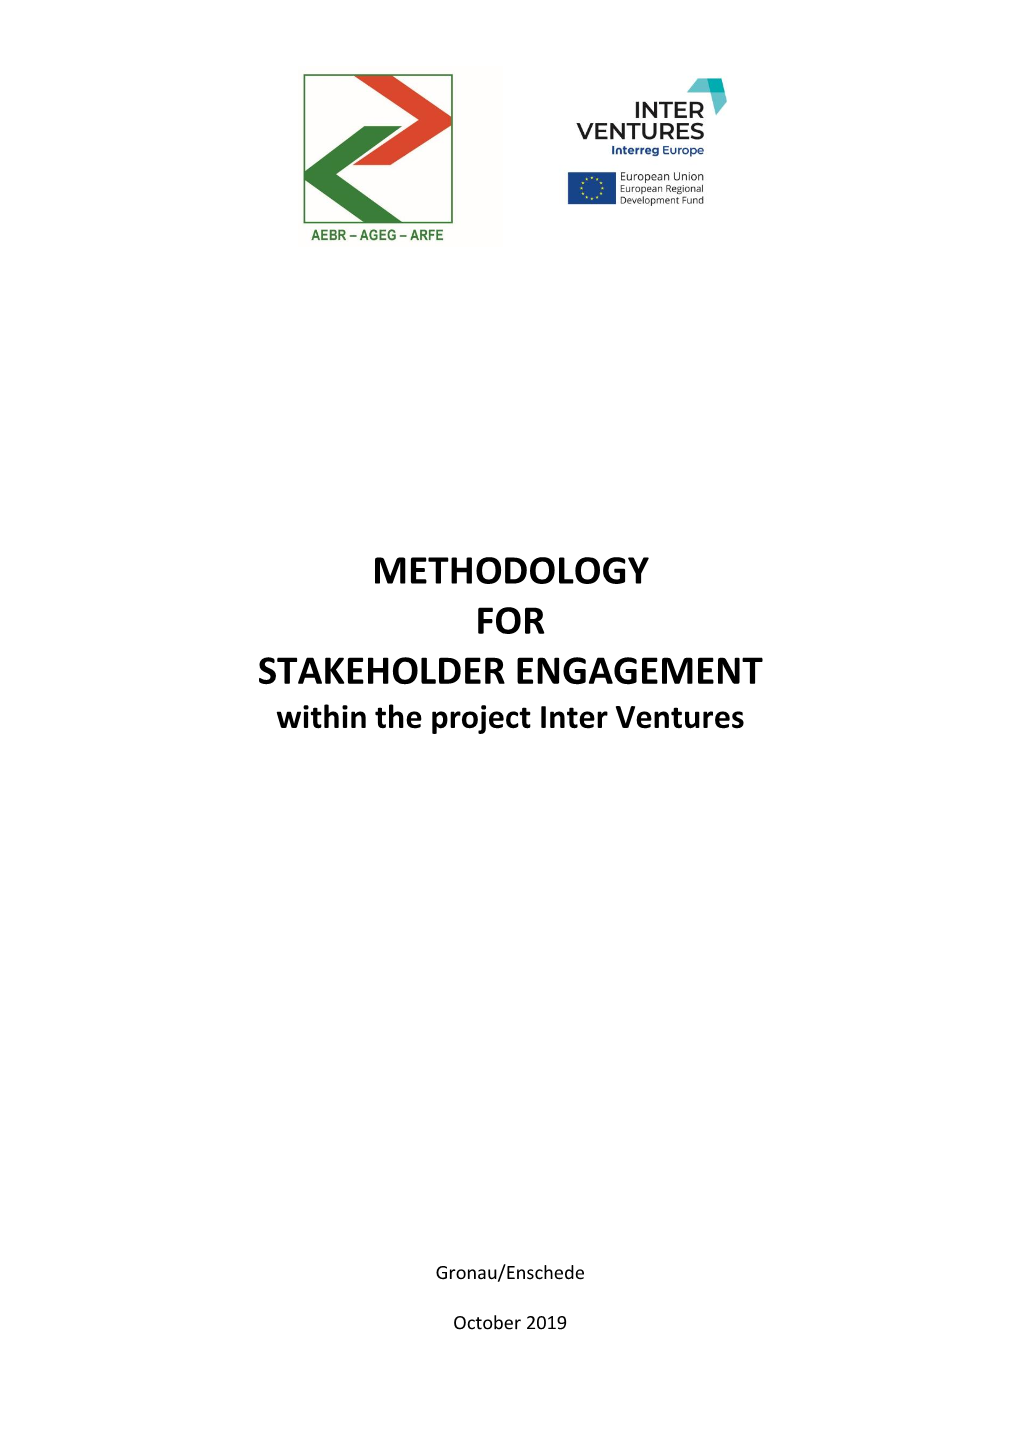 METHODOLOGY for STAKEHOLDER ENGAGEMENT Within the Project Inter Ventures